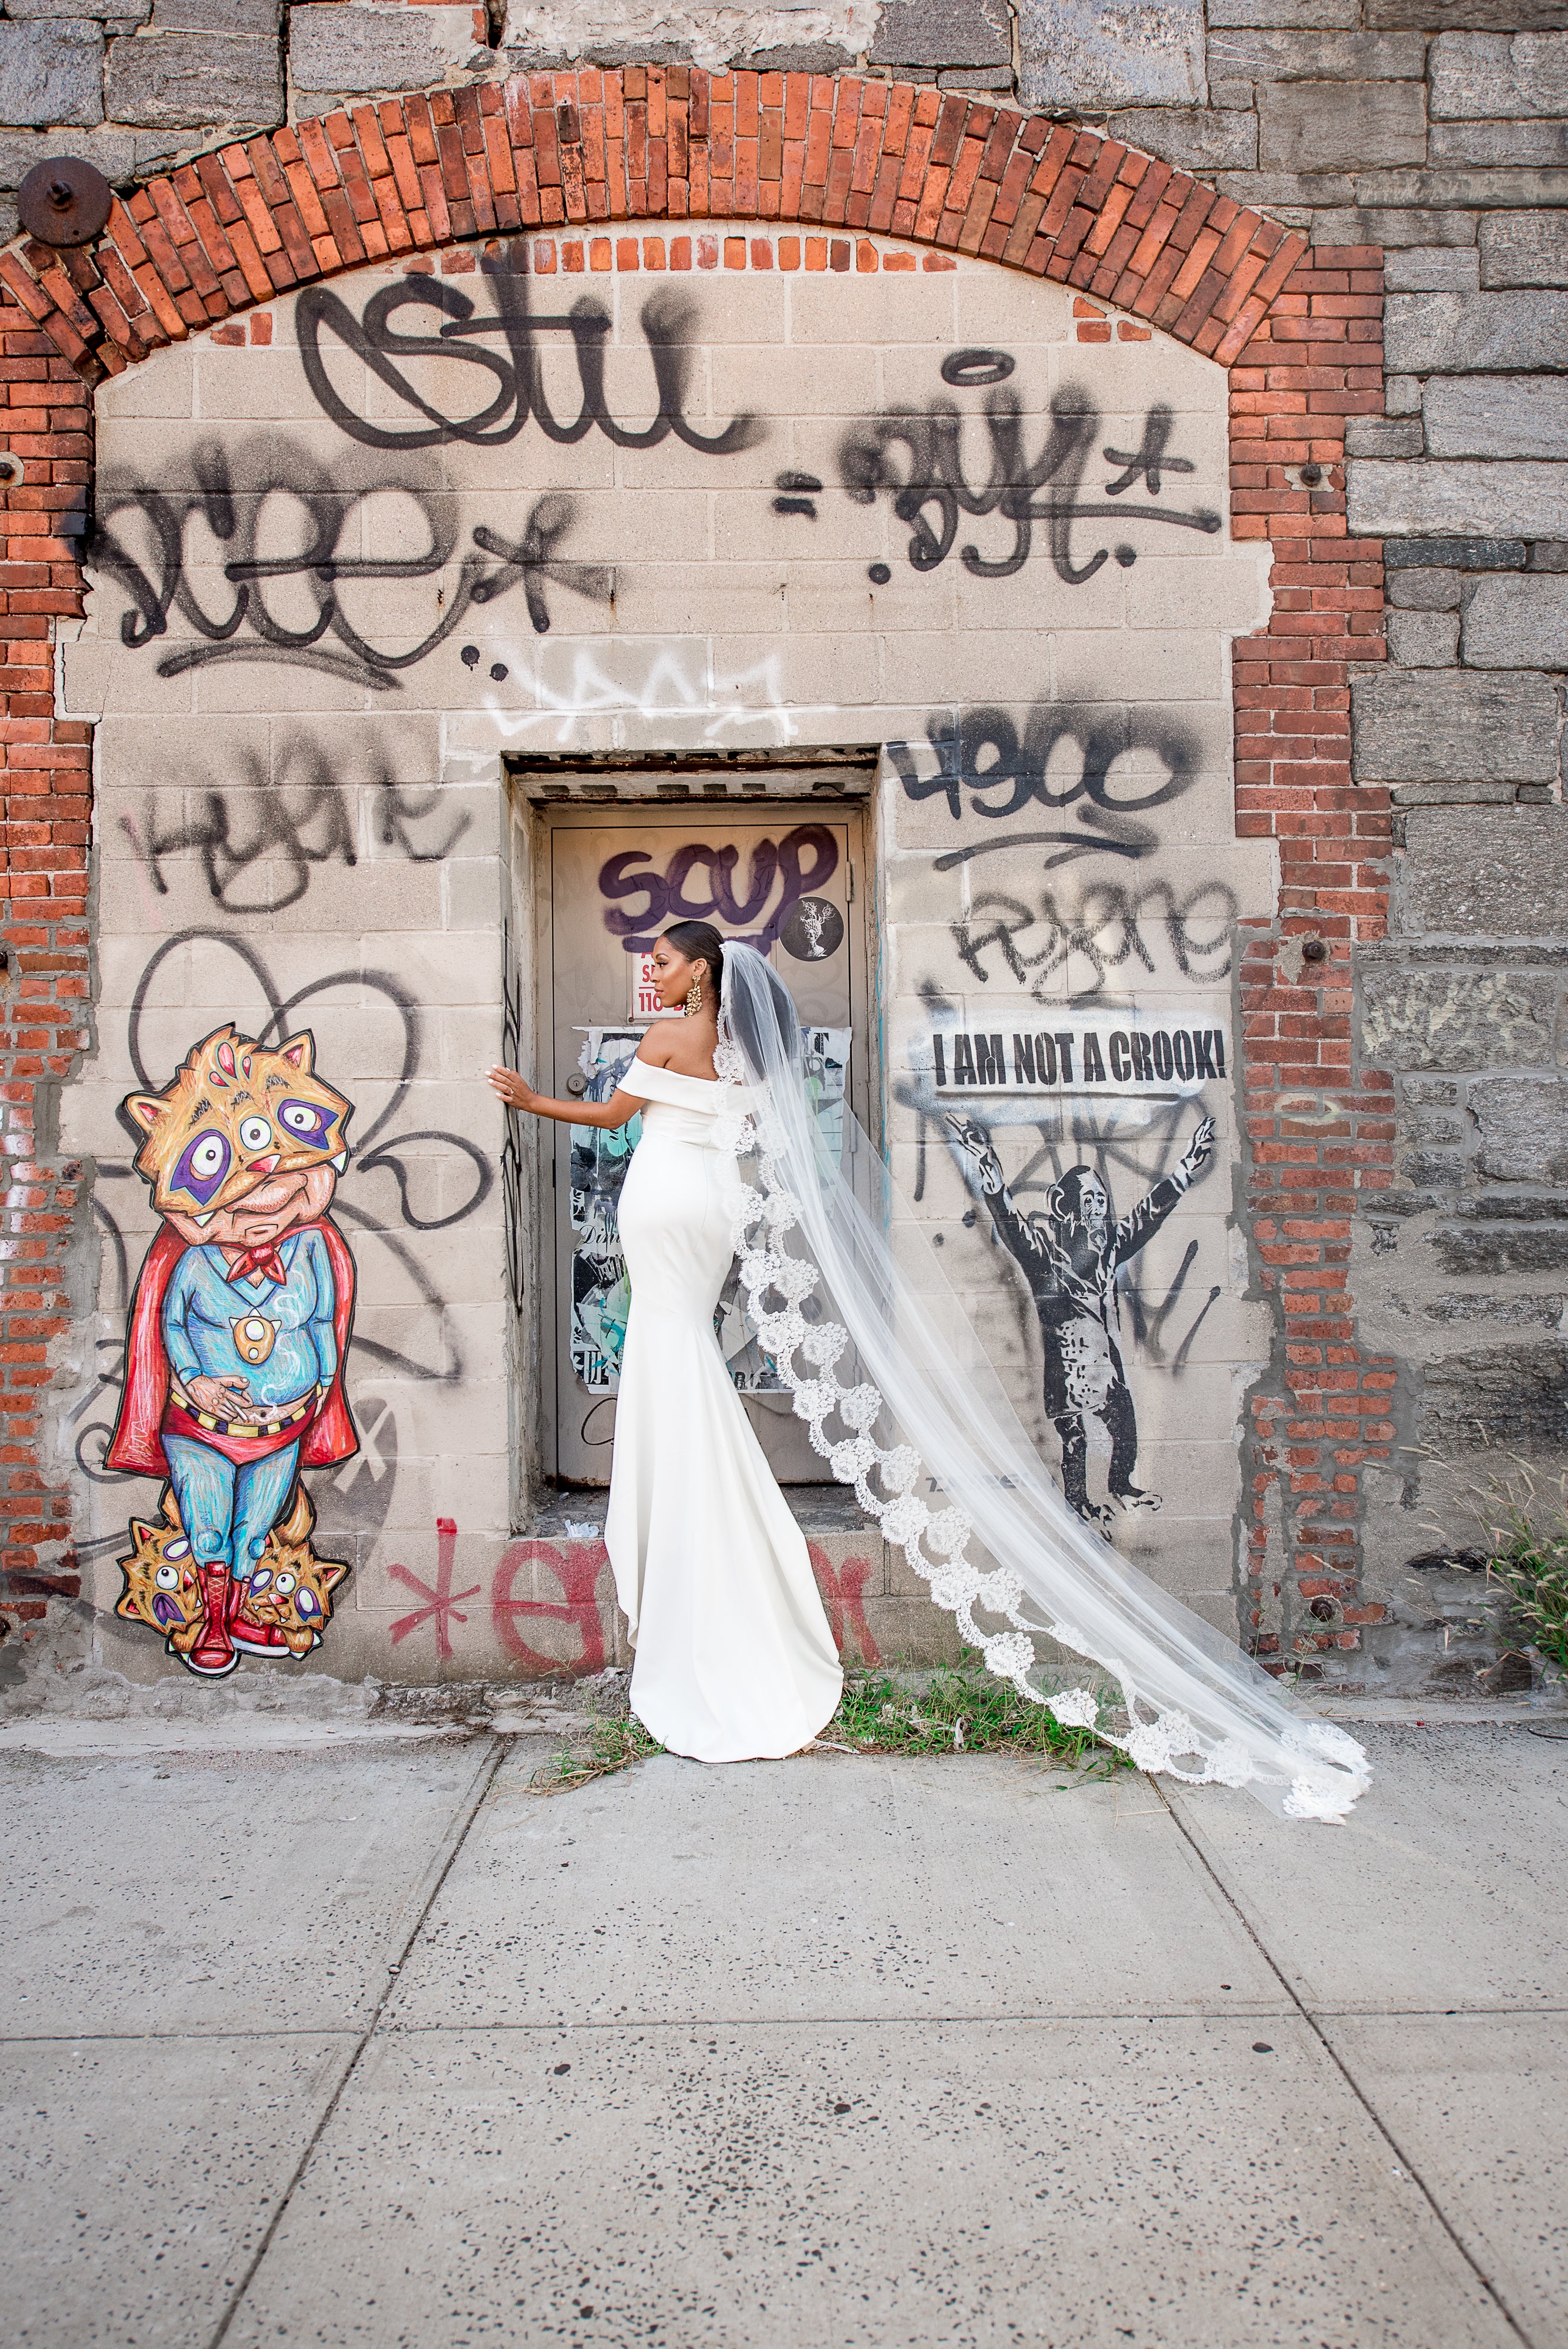 Bridal Bliss: Christin and Christina's Brooklyn Wedding Is The Perfect New York Love Story
